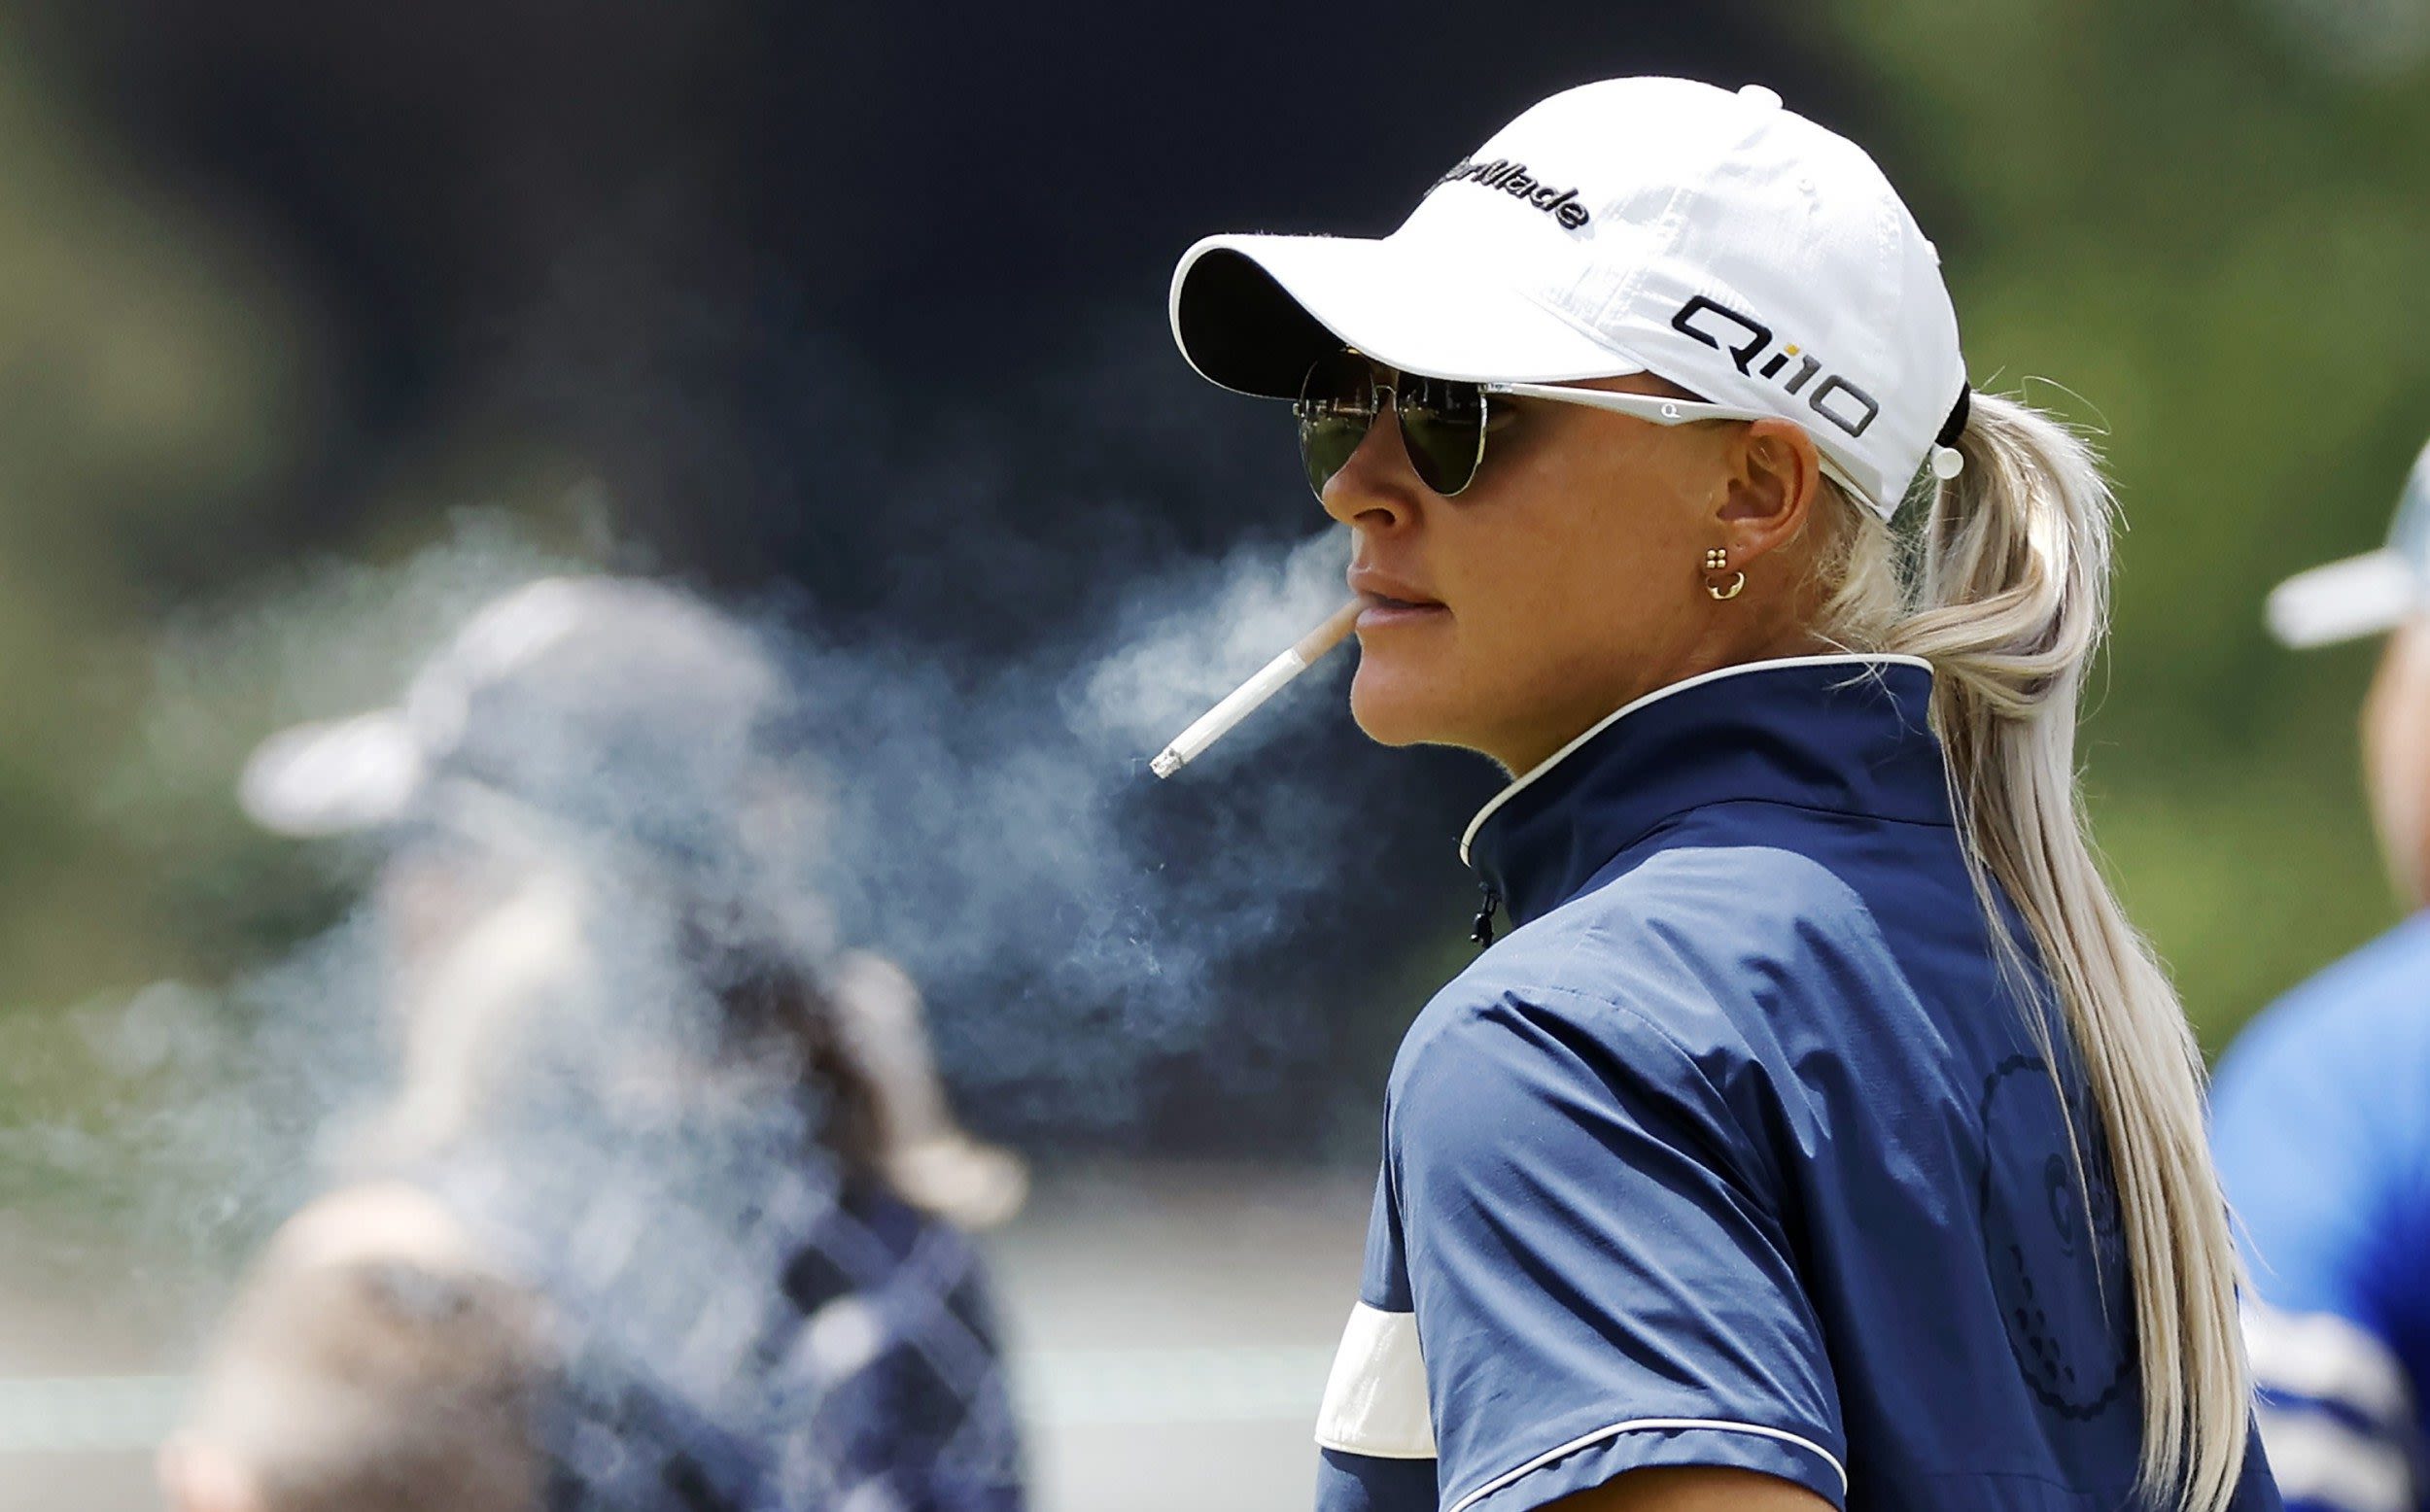 Charley Hull’s smoking video goes viral but English hopeful faces another missed major chance